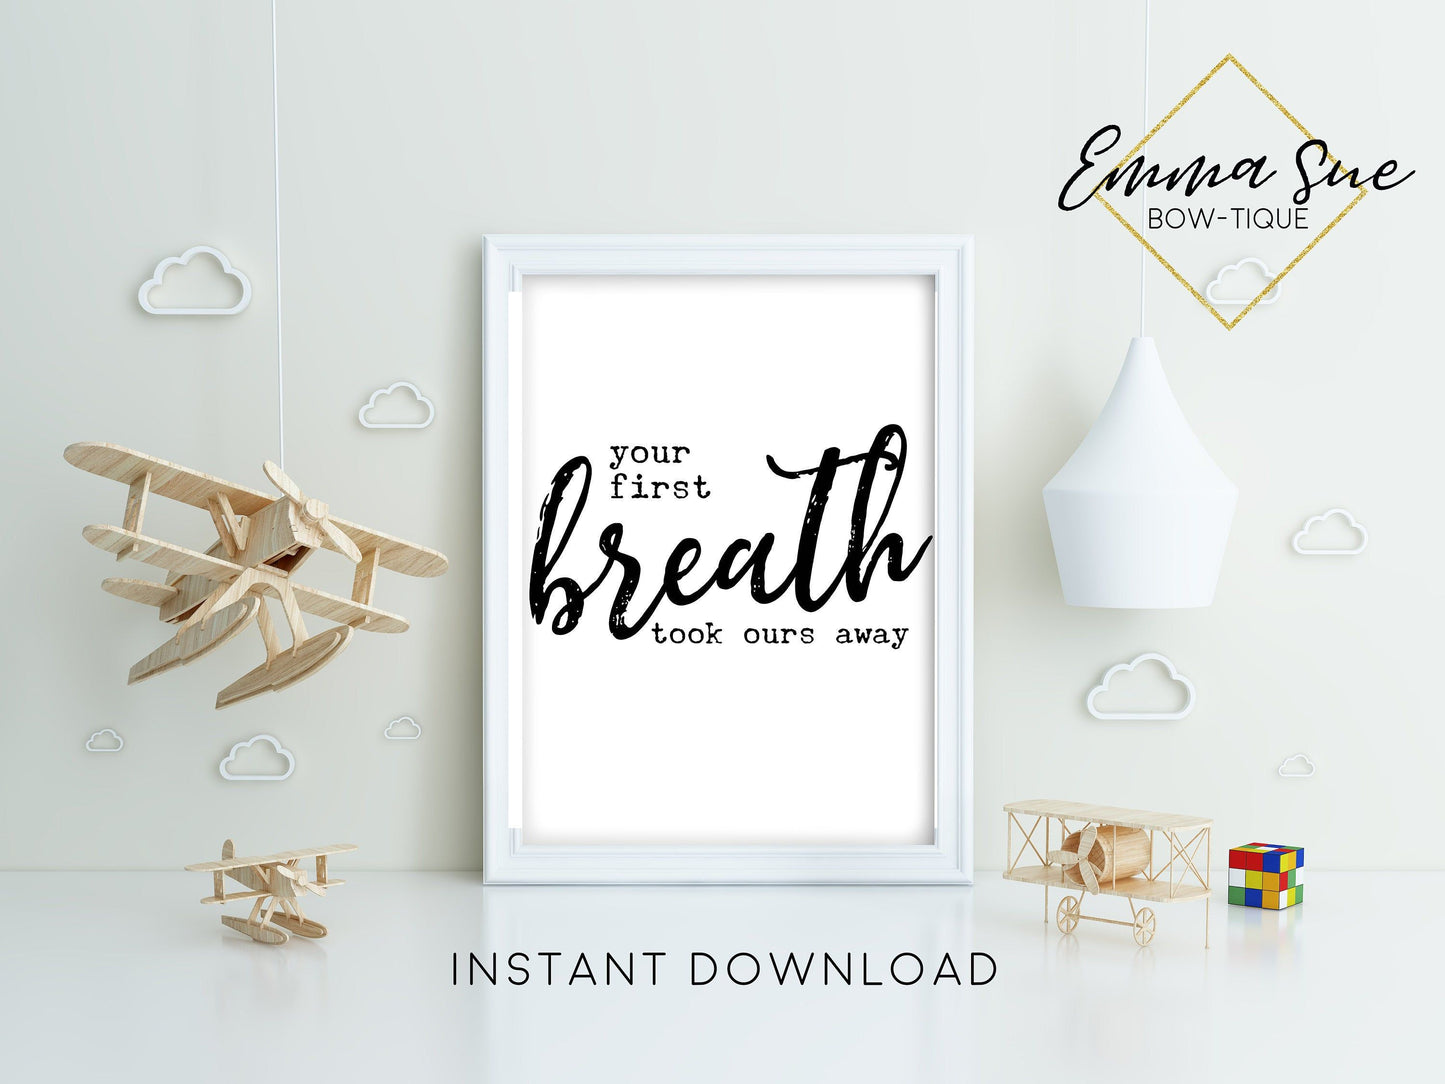 Your first breath took ours away - Baby Nursery room Wall Art Printable Sign - Digital File